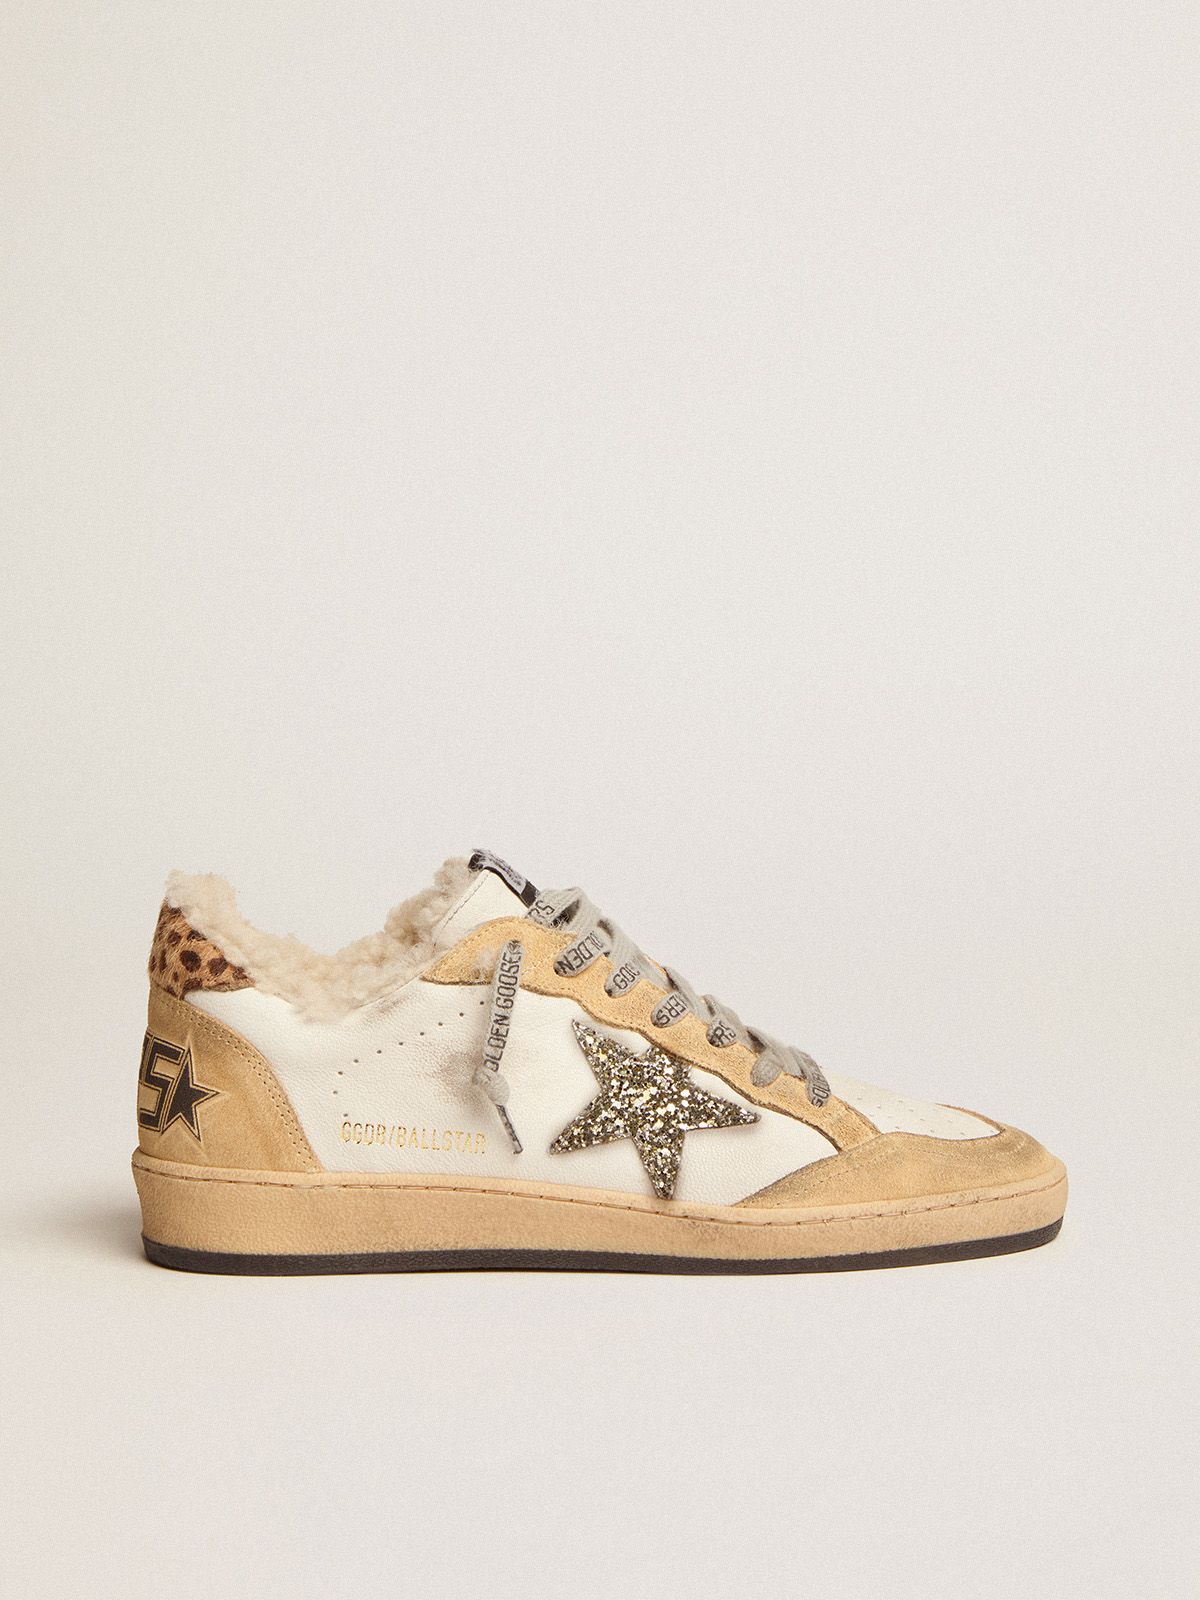 Golden Goose Sneakers Donna Ball Star sneakers in white nappa leather with platinum-colored glitter star and shearling lining